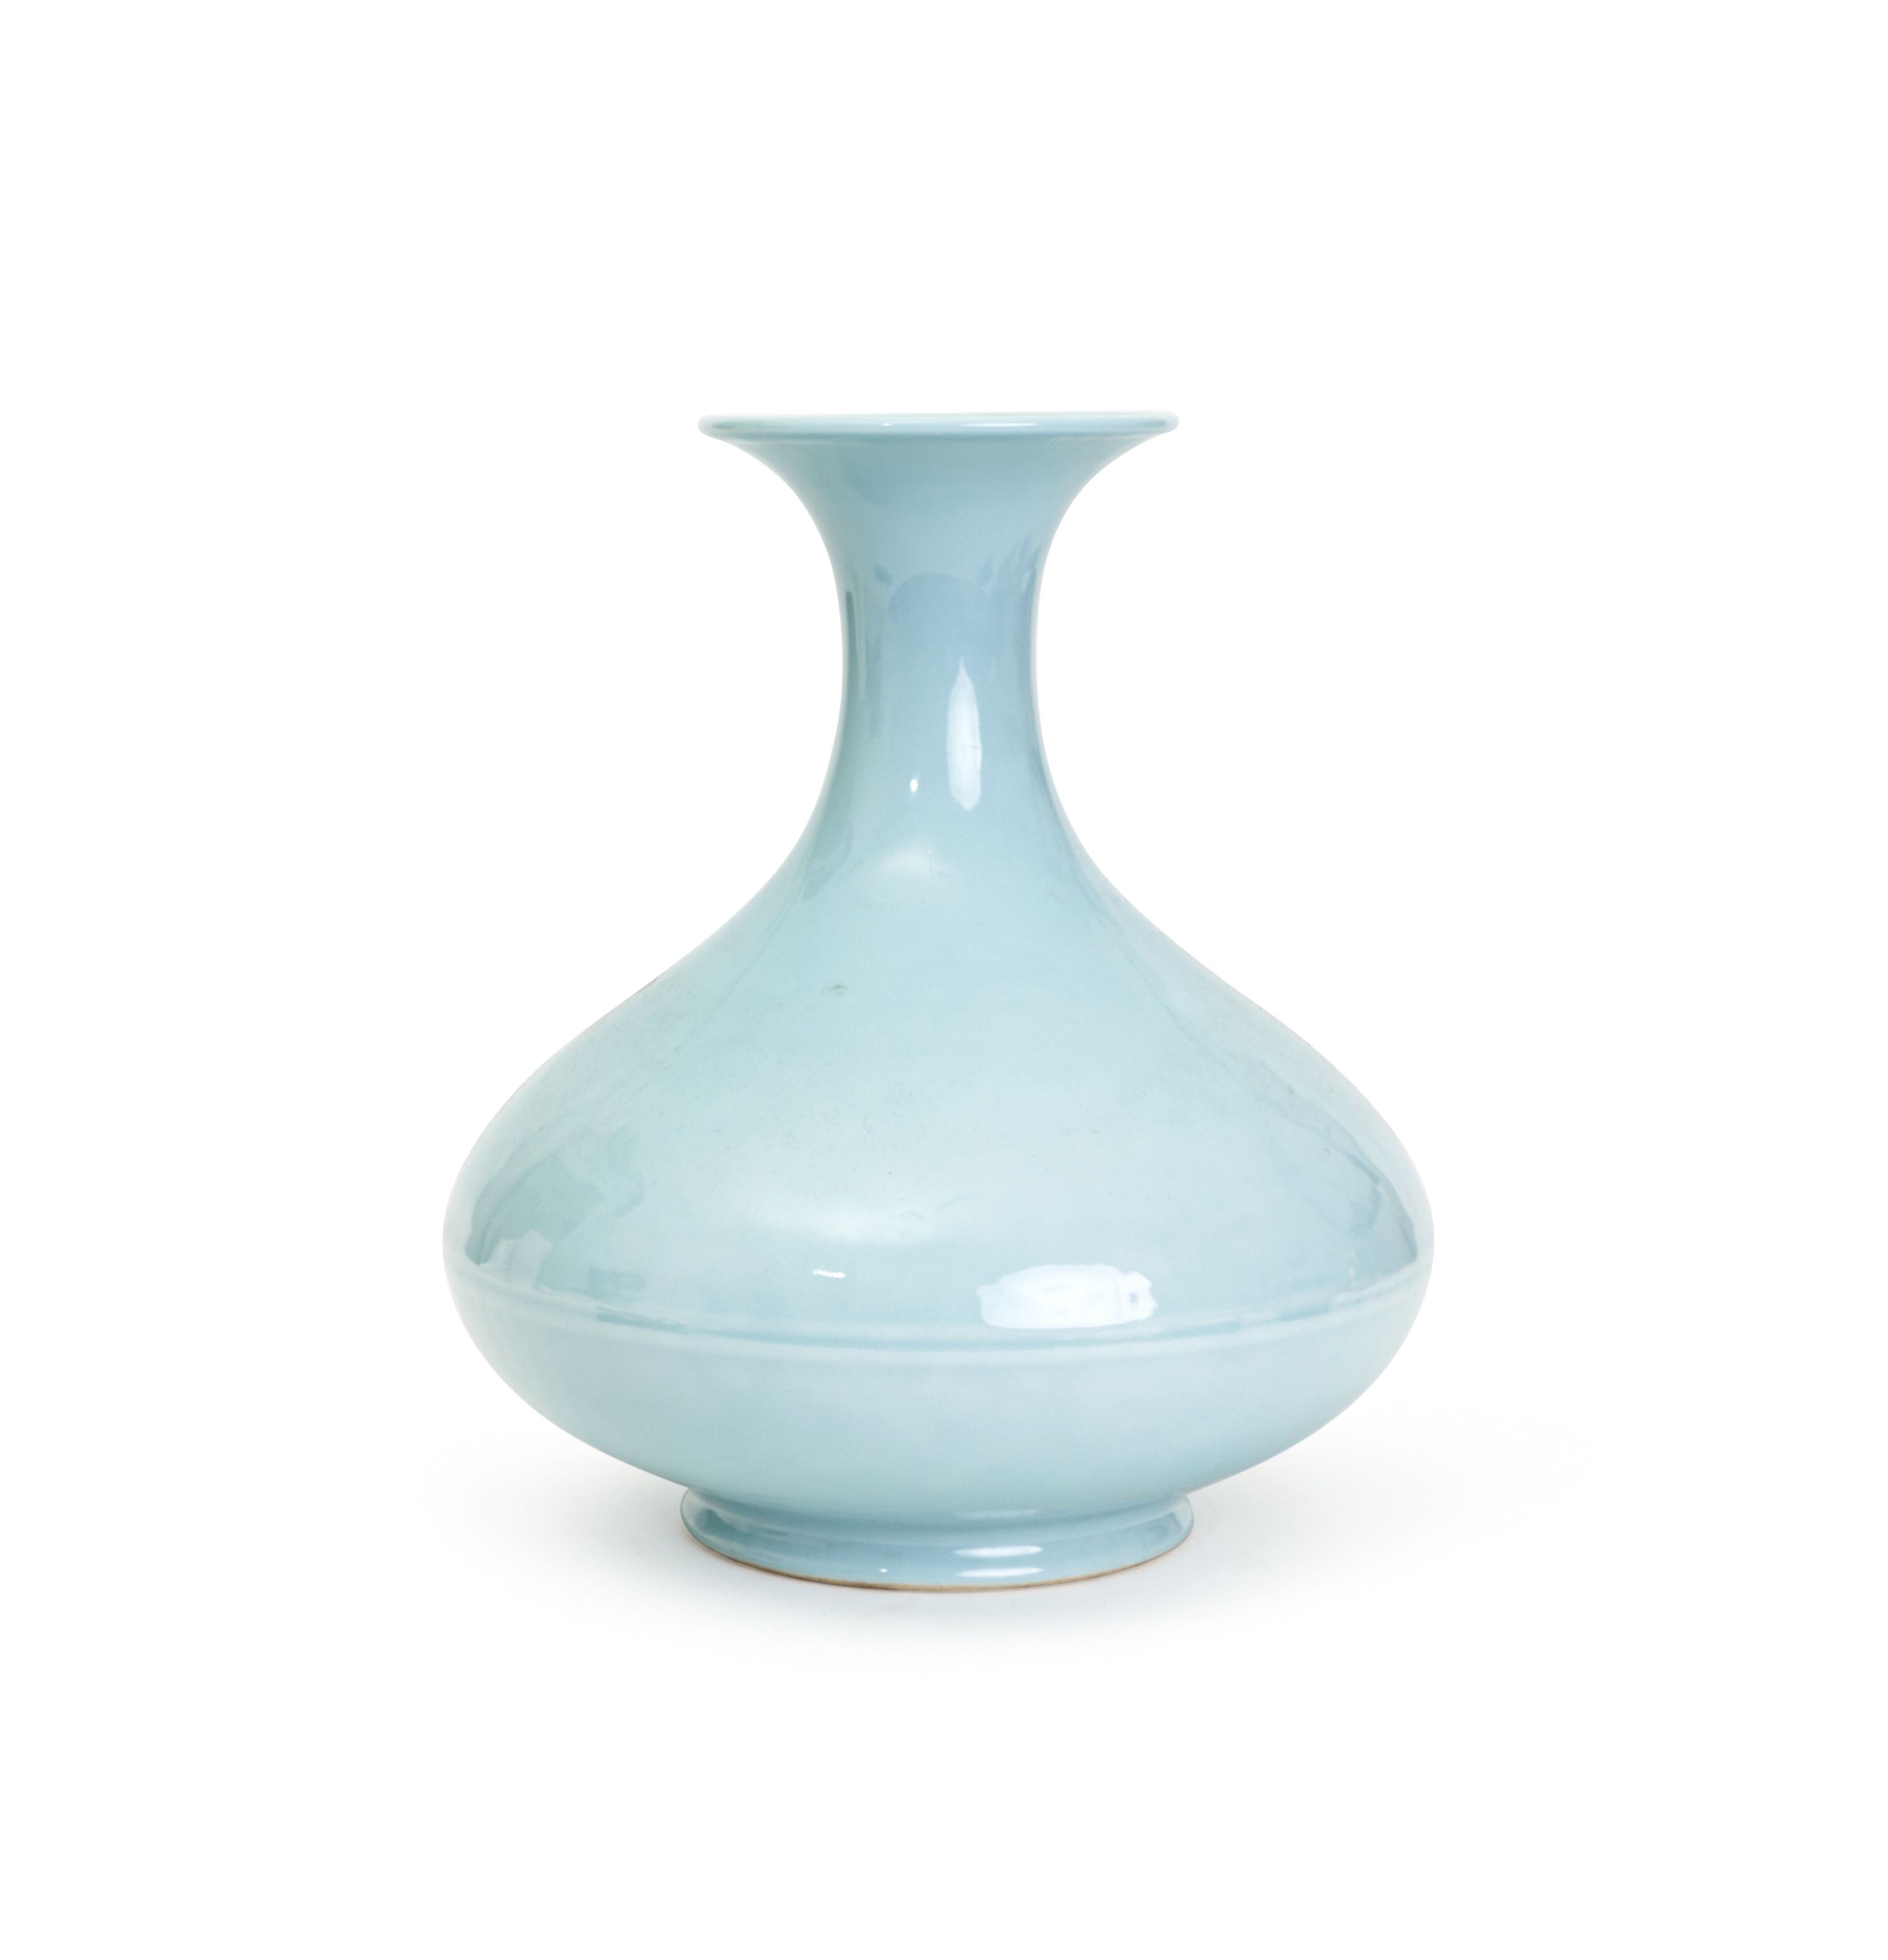 A CHINESE RU TYPE VASE, QING DYNASTY (1644-1911)